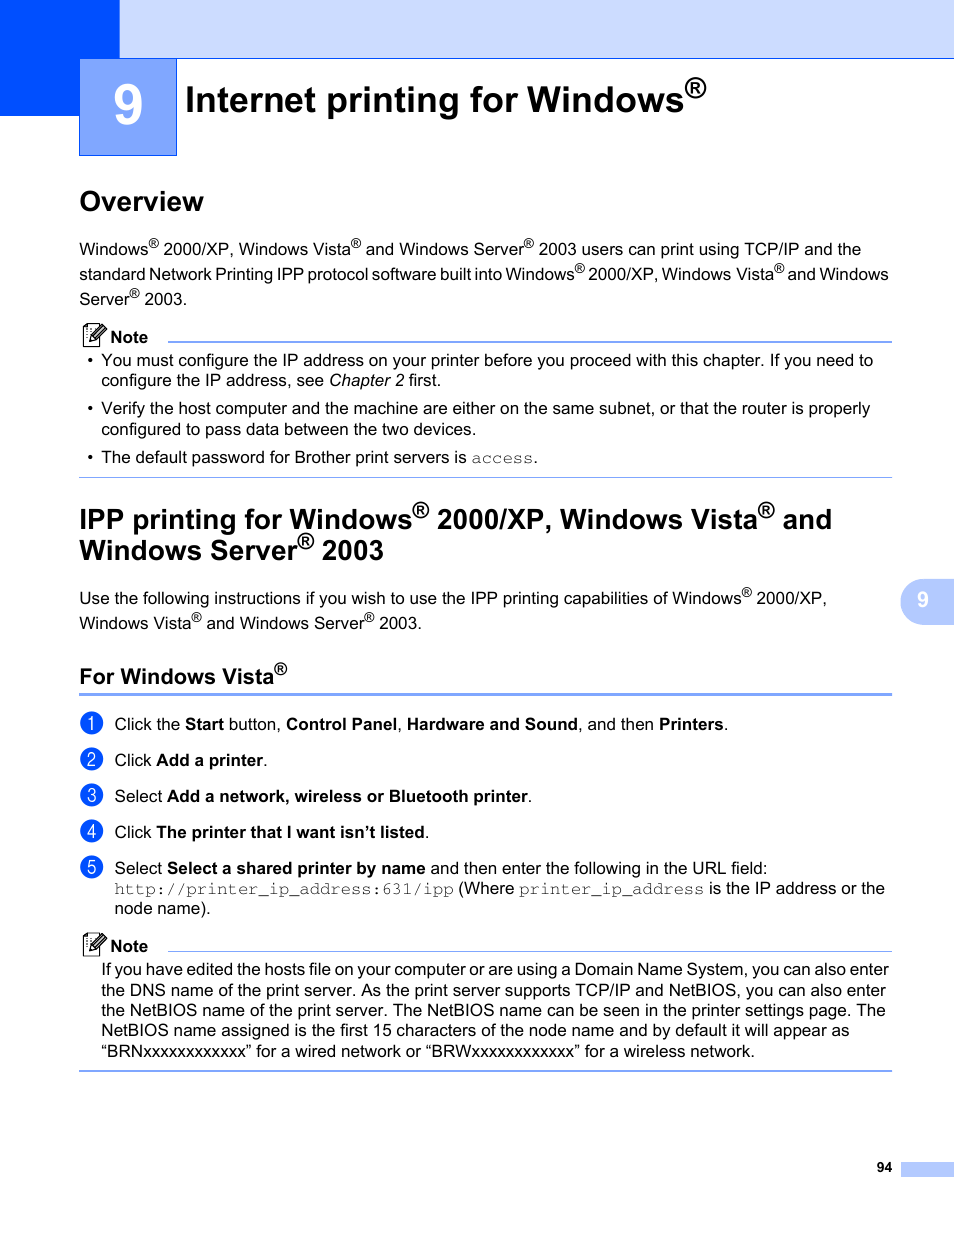 9 internet printing for windows, Overview, For windows vista | Internet printing for windows, Overview ipp printing for windows, Ipp printing for windows, 2000/xp, windows vista, And windows server | Brother HL-2170W User Manual | Page 101 / 137